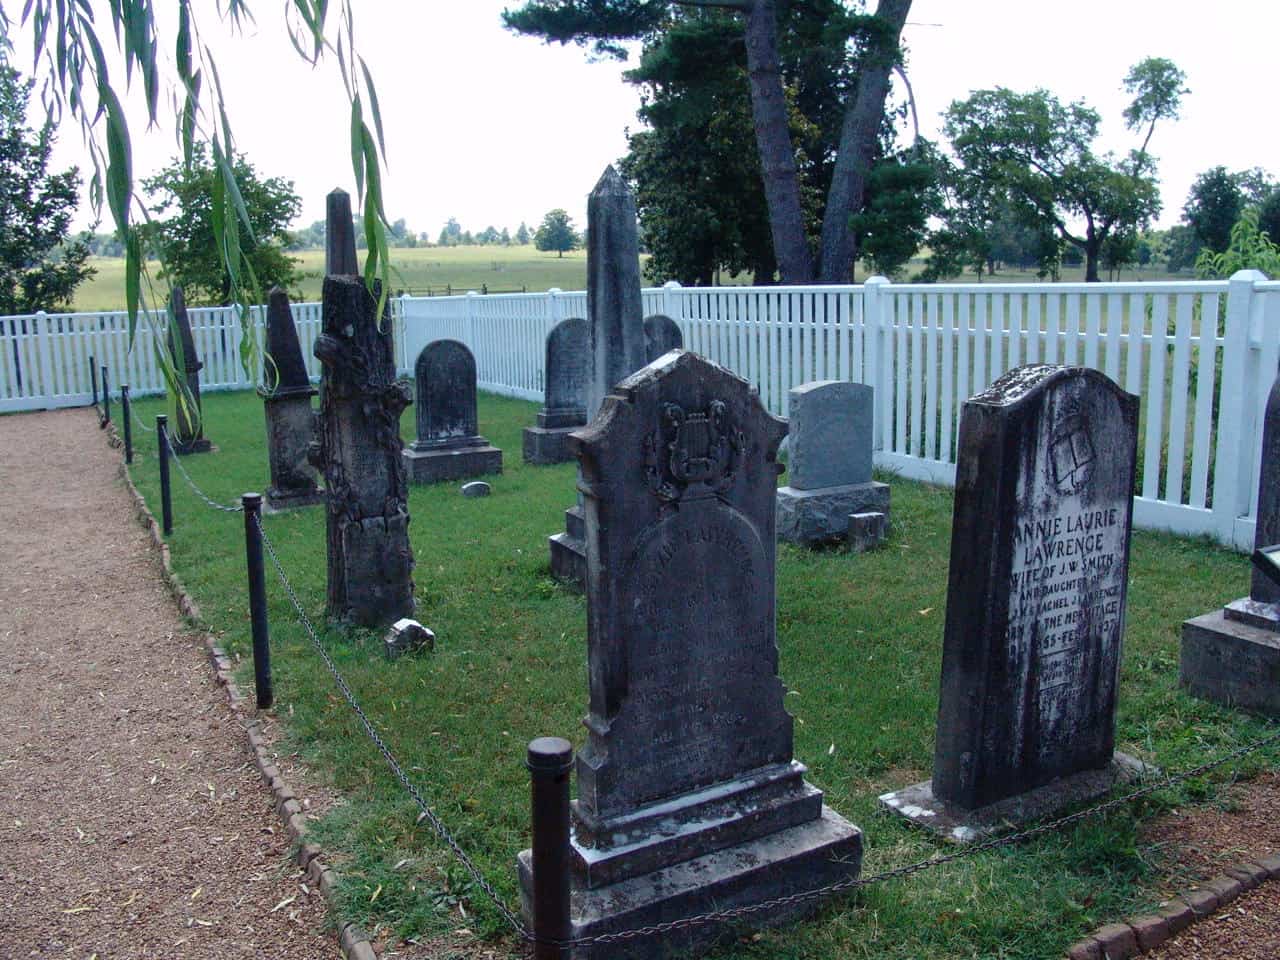 Cemetery at The Hermitage in Nashville, Tennessee